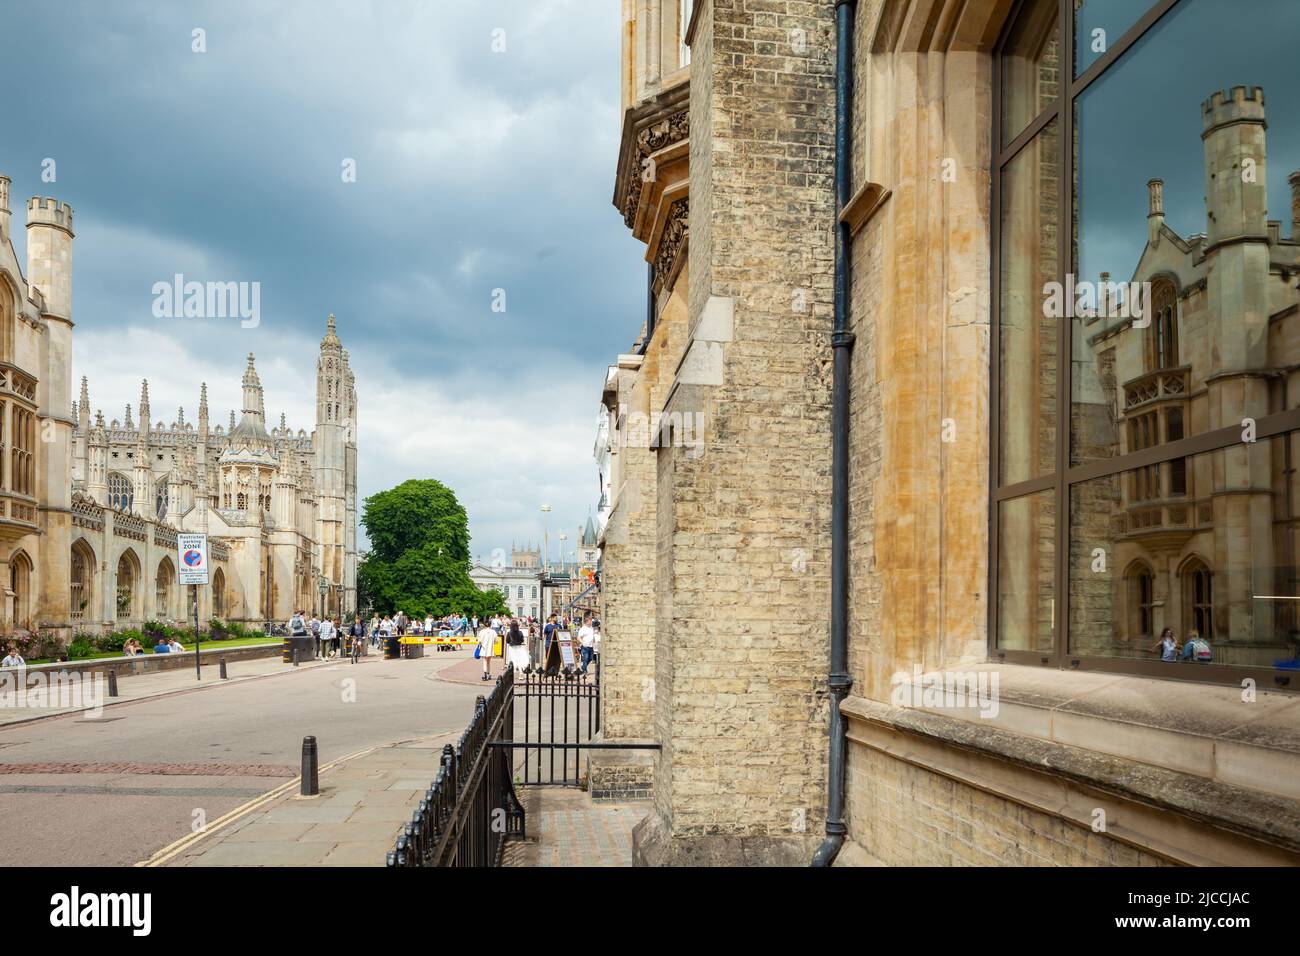 Spring afternoon on King's Parade in Cambridge city centre, England. Stock Photo